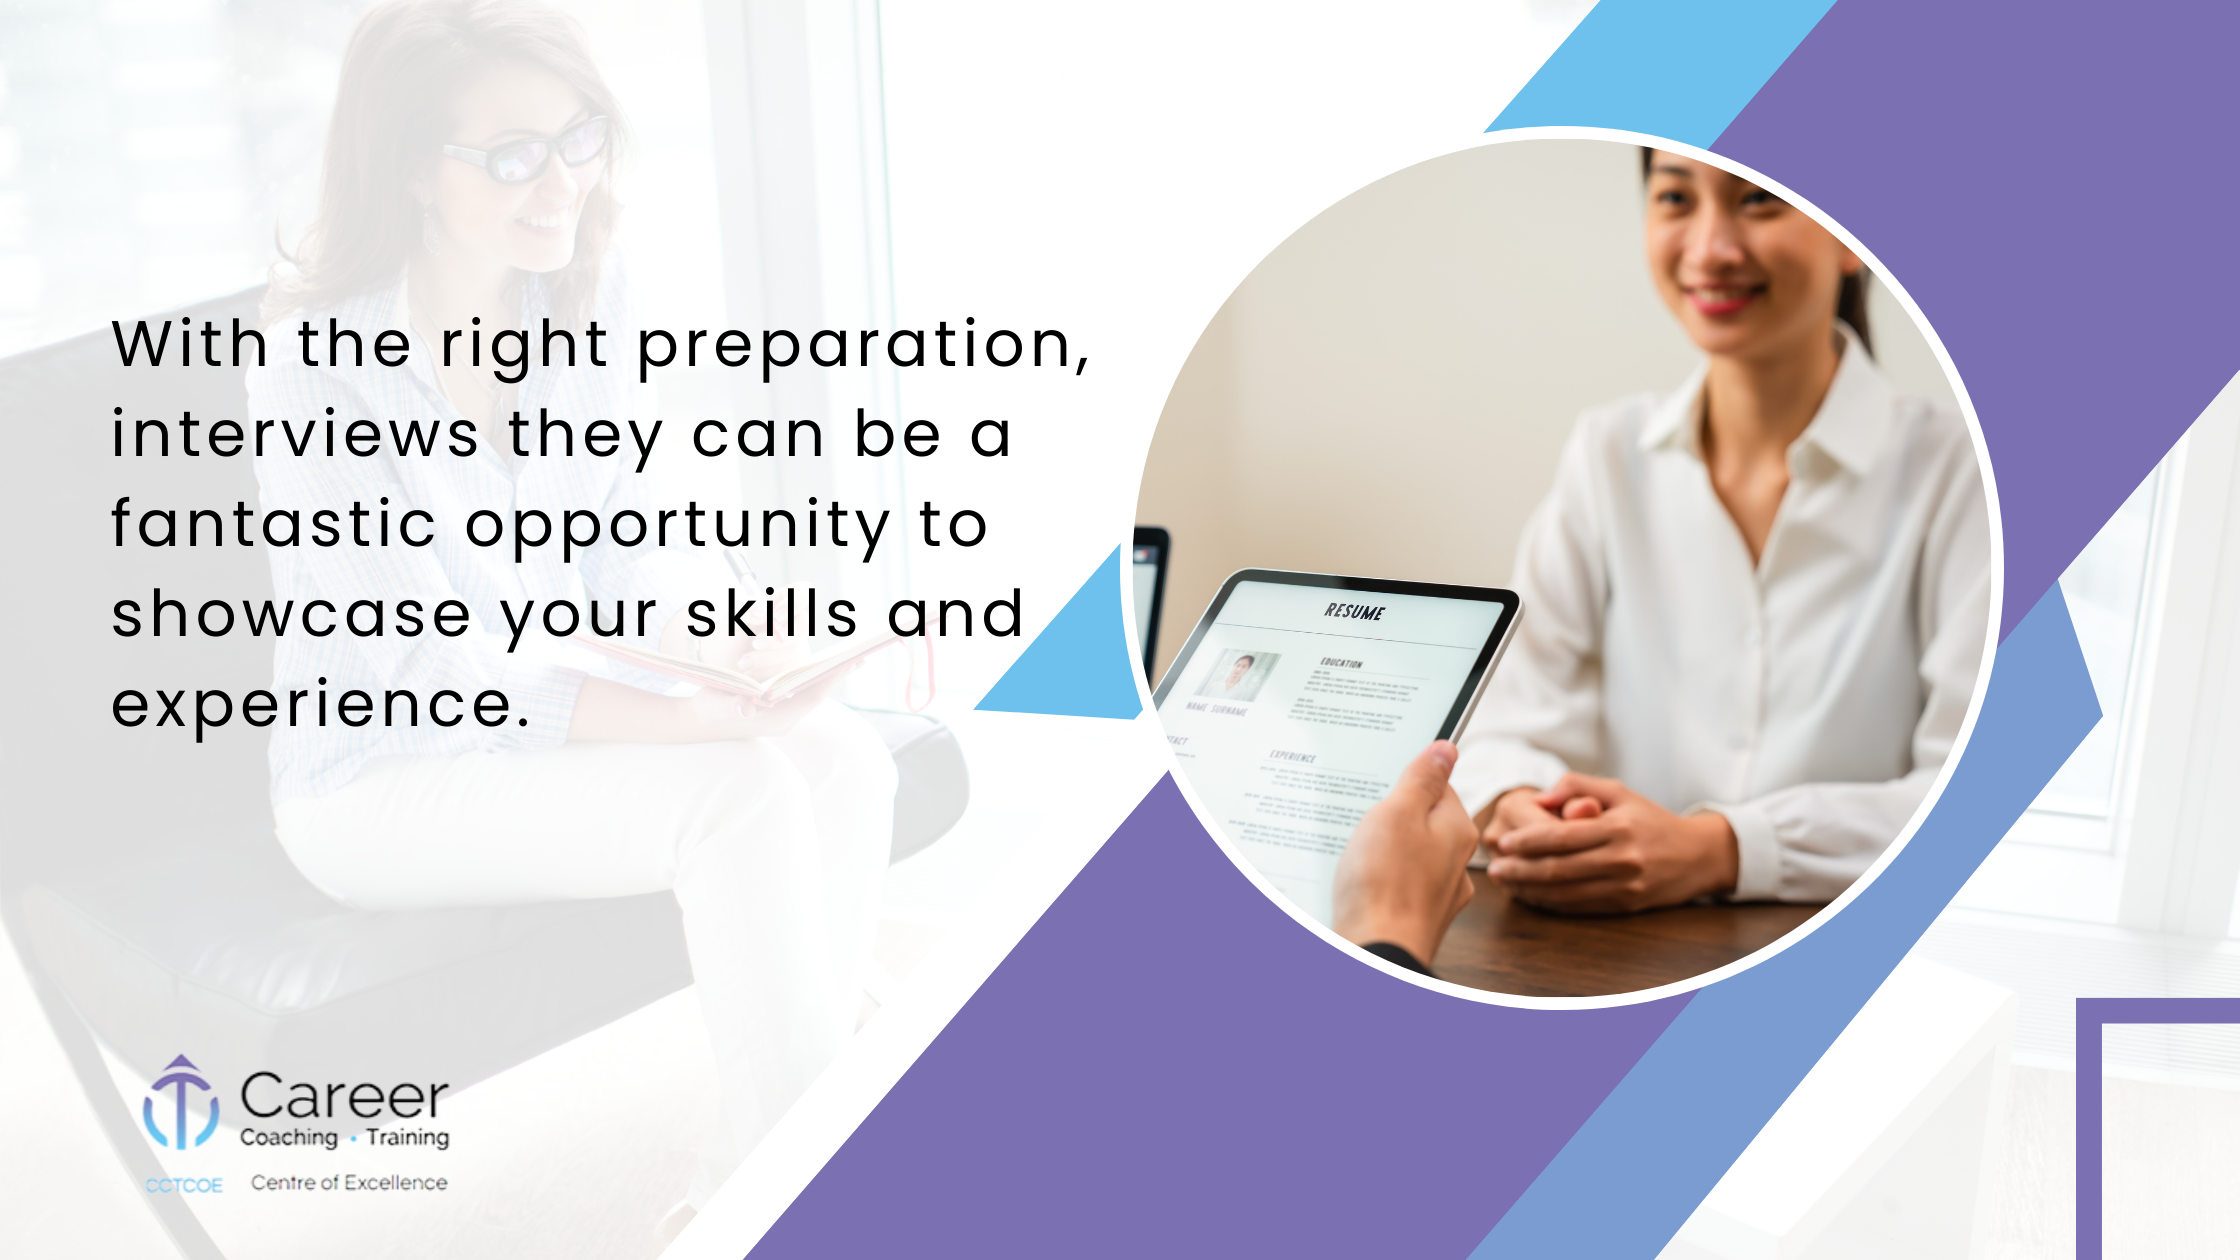 With the right preparation, interviews they can be a fantastic opportunity to showcase your skills and experience.